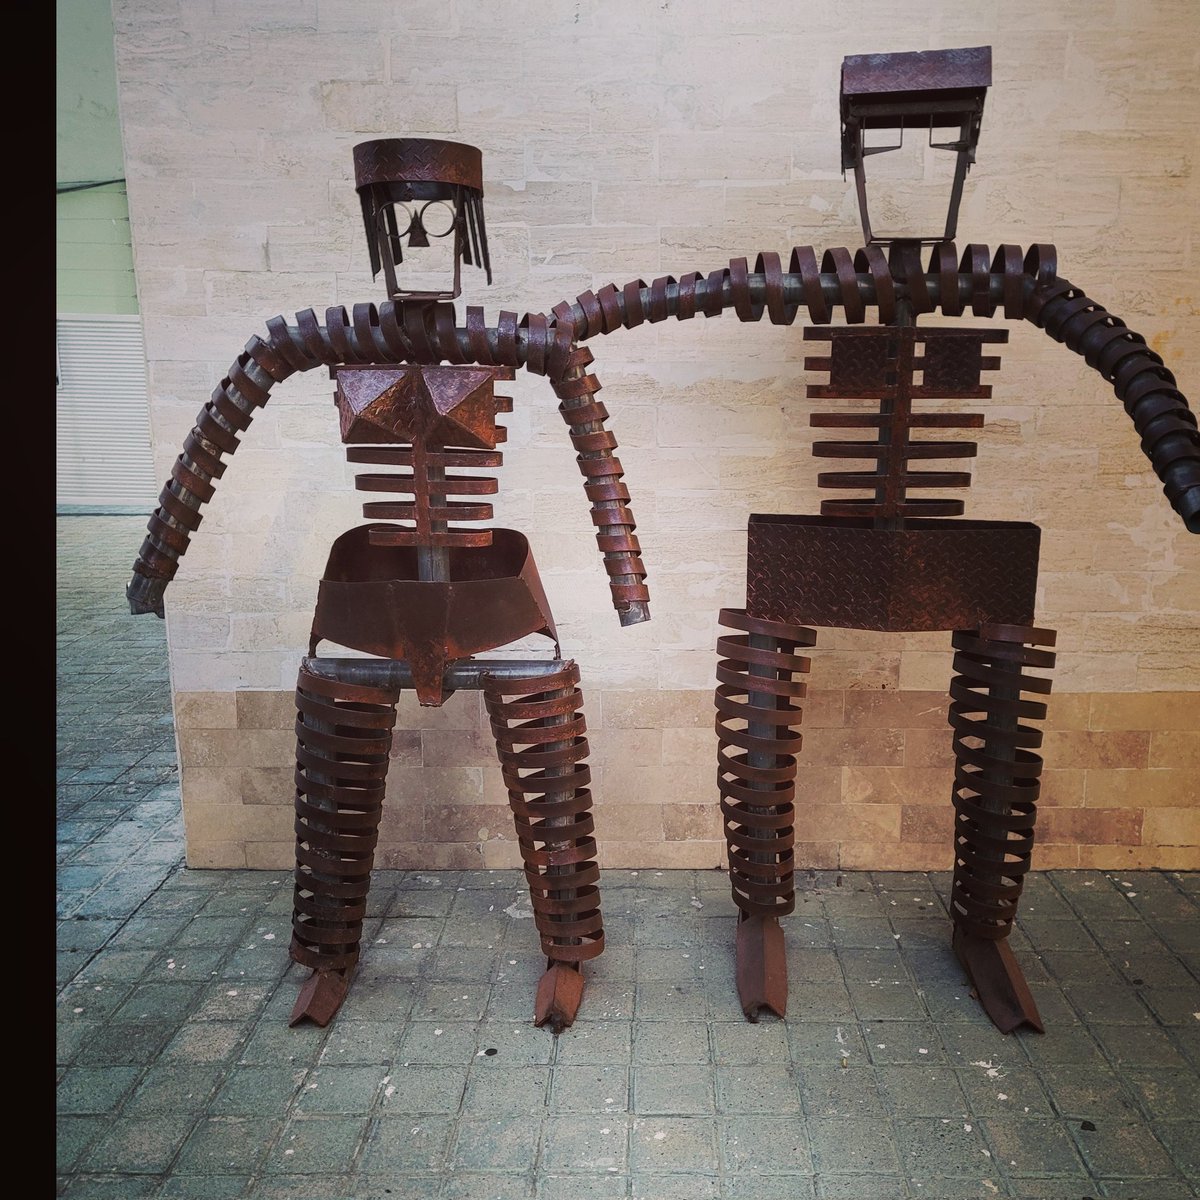 Robot couple in Guadalajara 

Photo by Farouk Rojas

#guadalajara #jalisco #mexico #mexicolife #mexicolindo #streetphotography #urbanandstreet #cityscape #cityexplore #urban #urbanphotography #instagood #cityphotography #urbanexploration #city #sculpture #art #robot